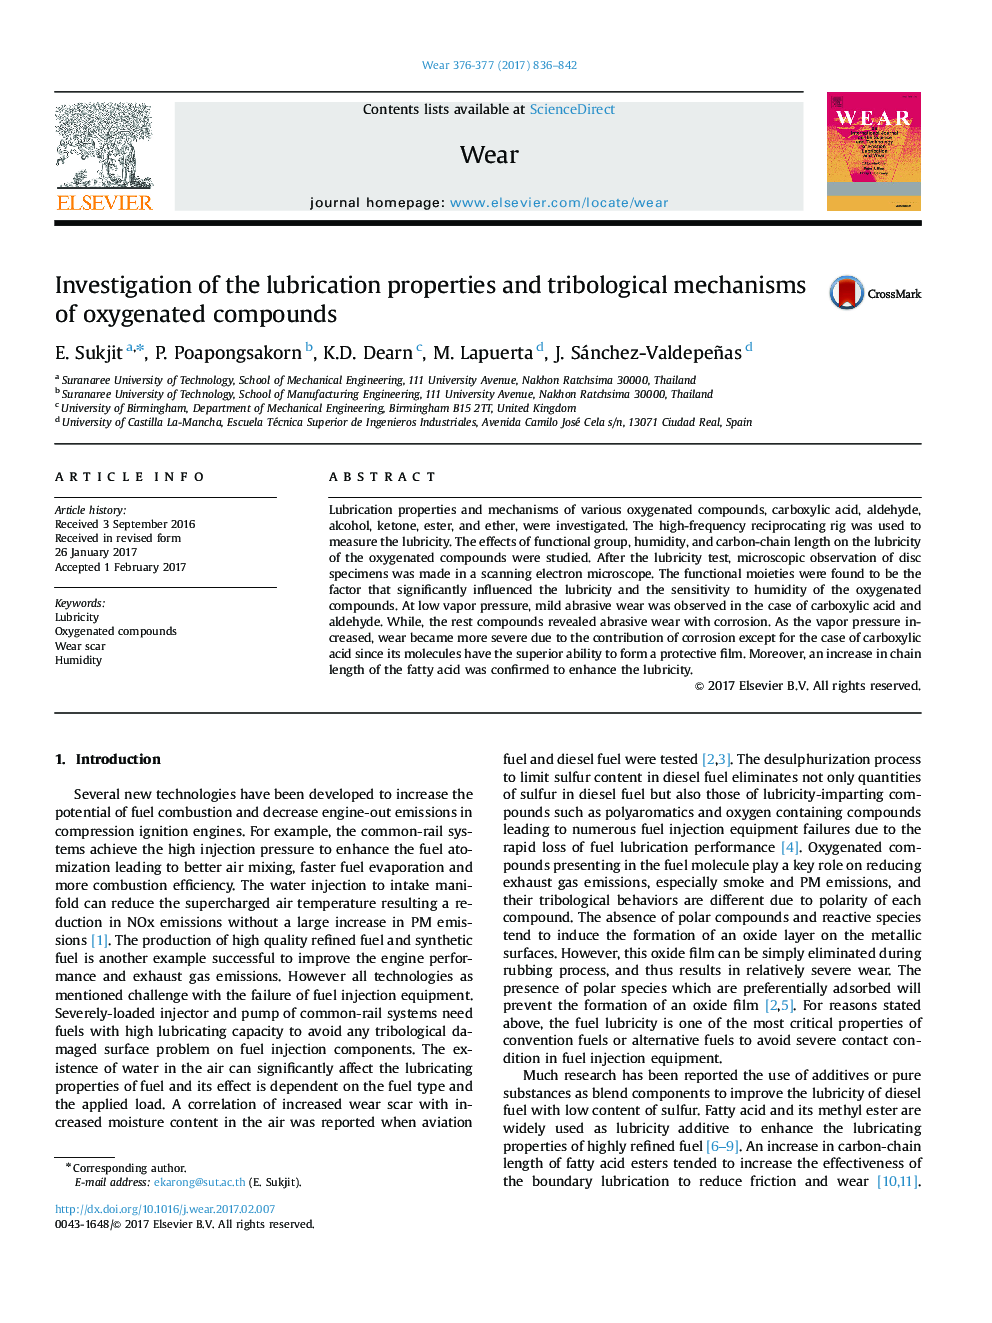 Investigation of the lubrication properties and tribological mechanisms of oxygenated compounds